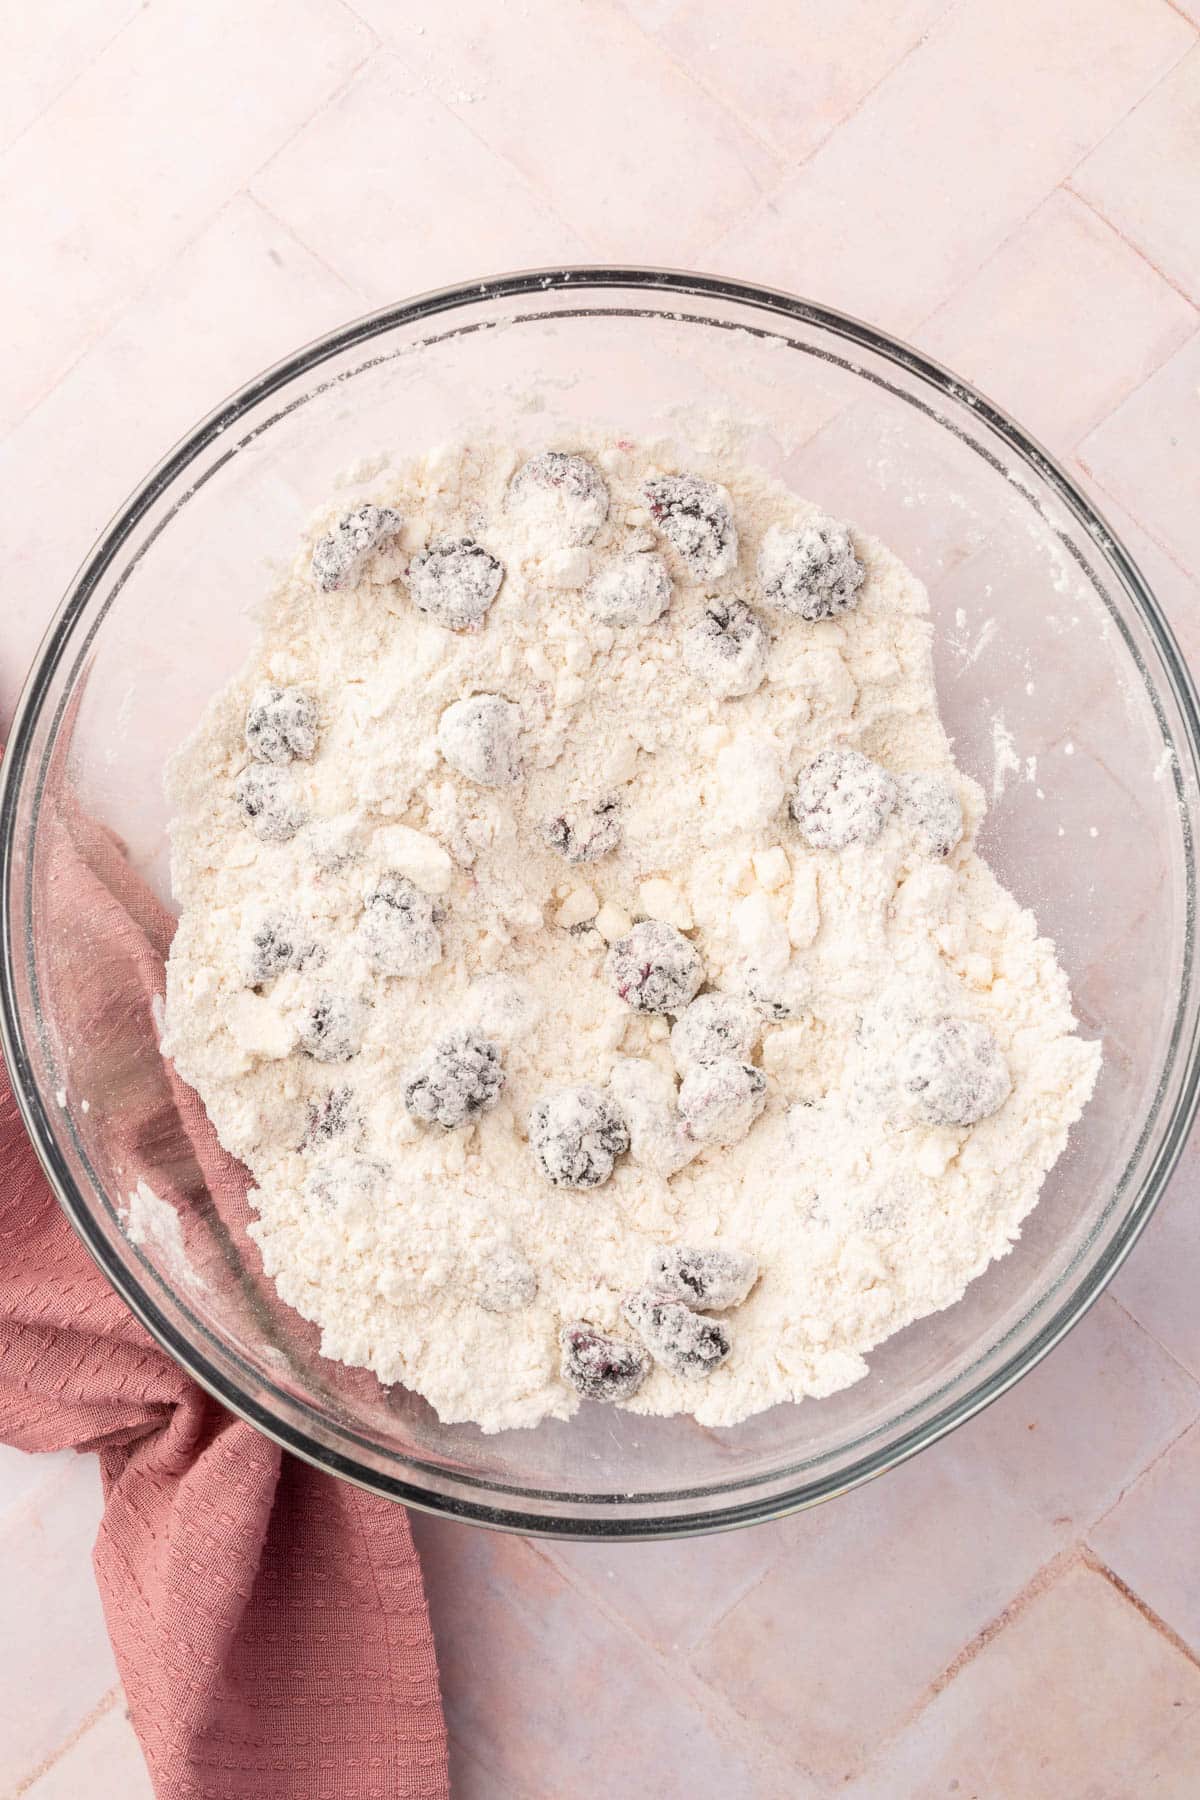 A glass mixing bowl with flour, little chunks of butter and blackberries that have all been mixed together.